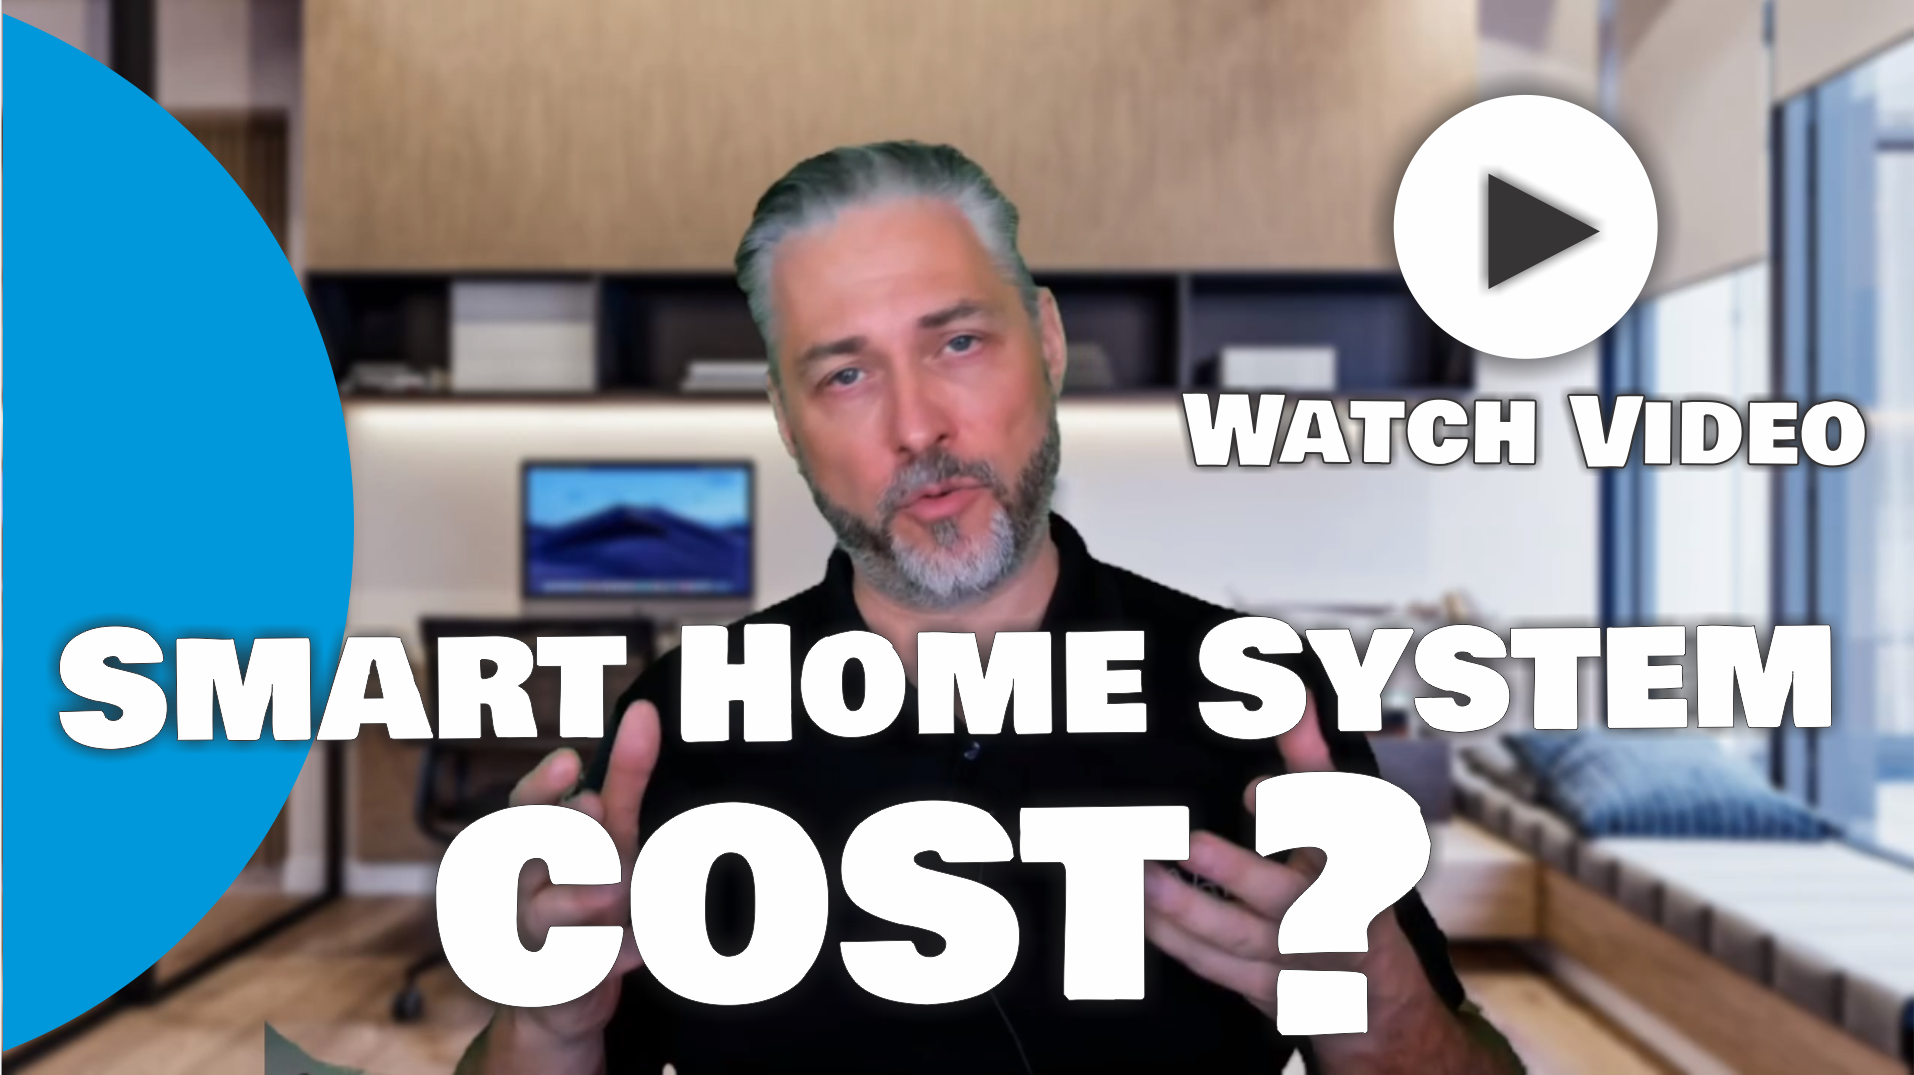 Dubai Smart Home Automation 2 - image smart-home-costs on https://avario.ae